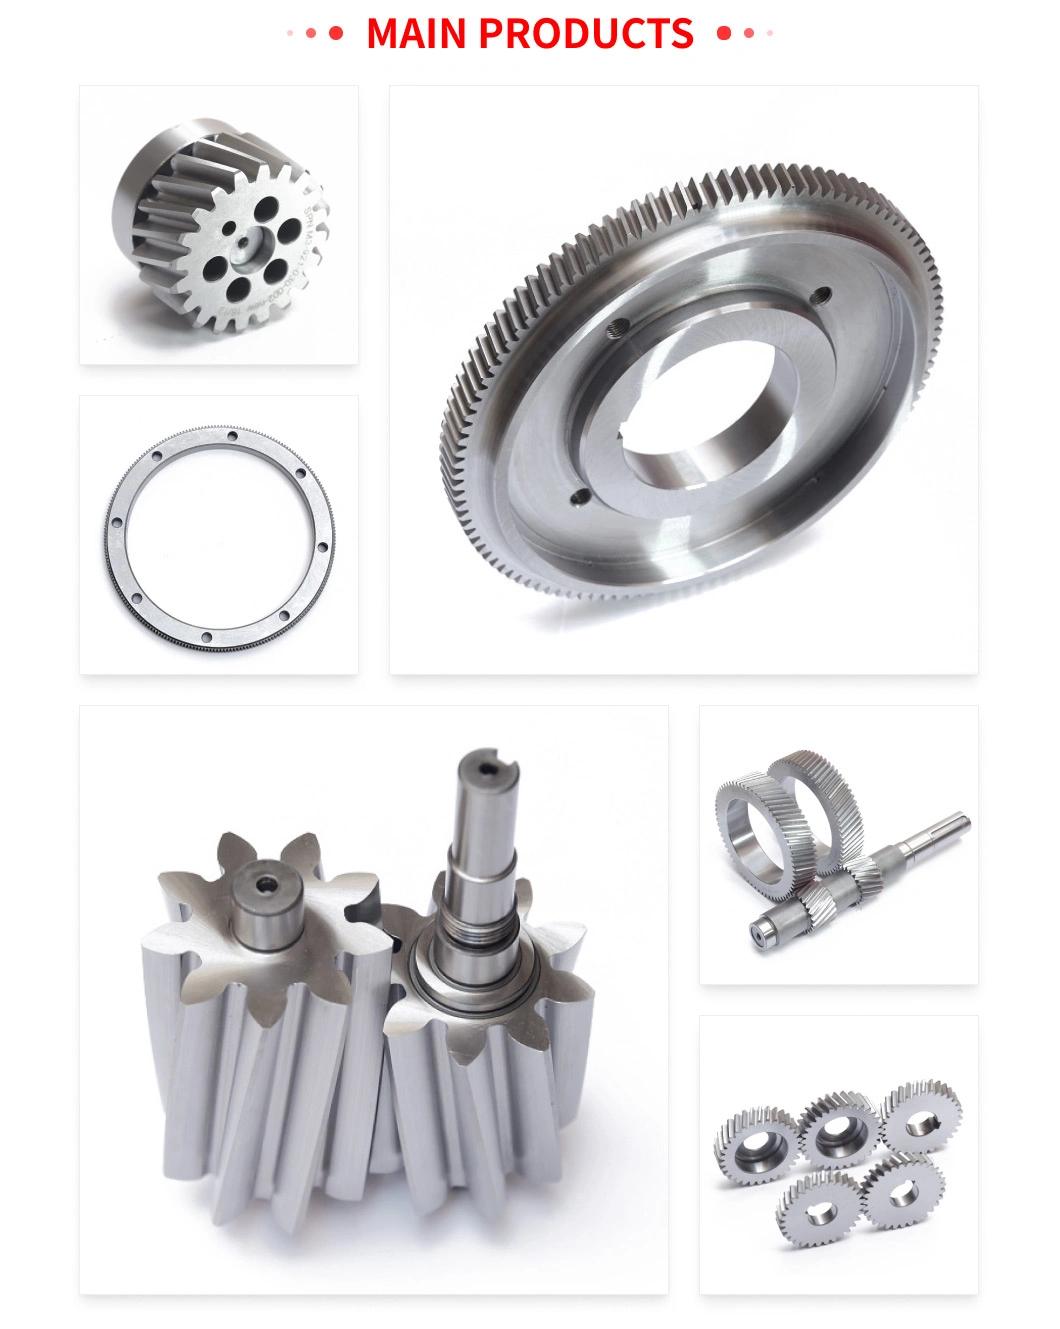 Powder Metallurgy Transmission Iron Alloy Double Sintered Doulbe Gear for Motor